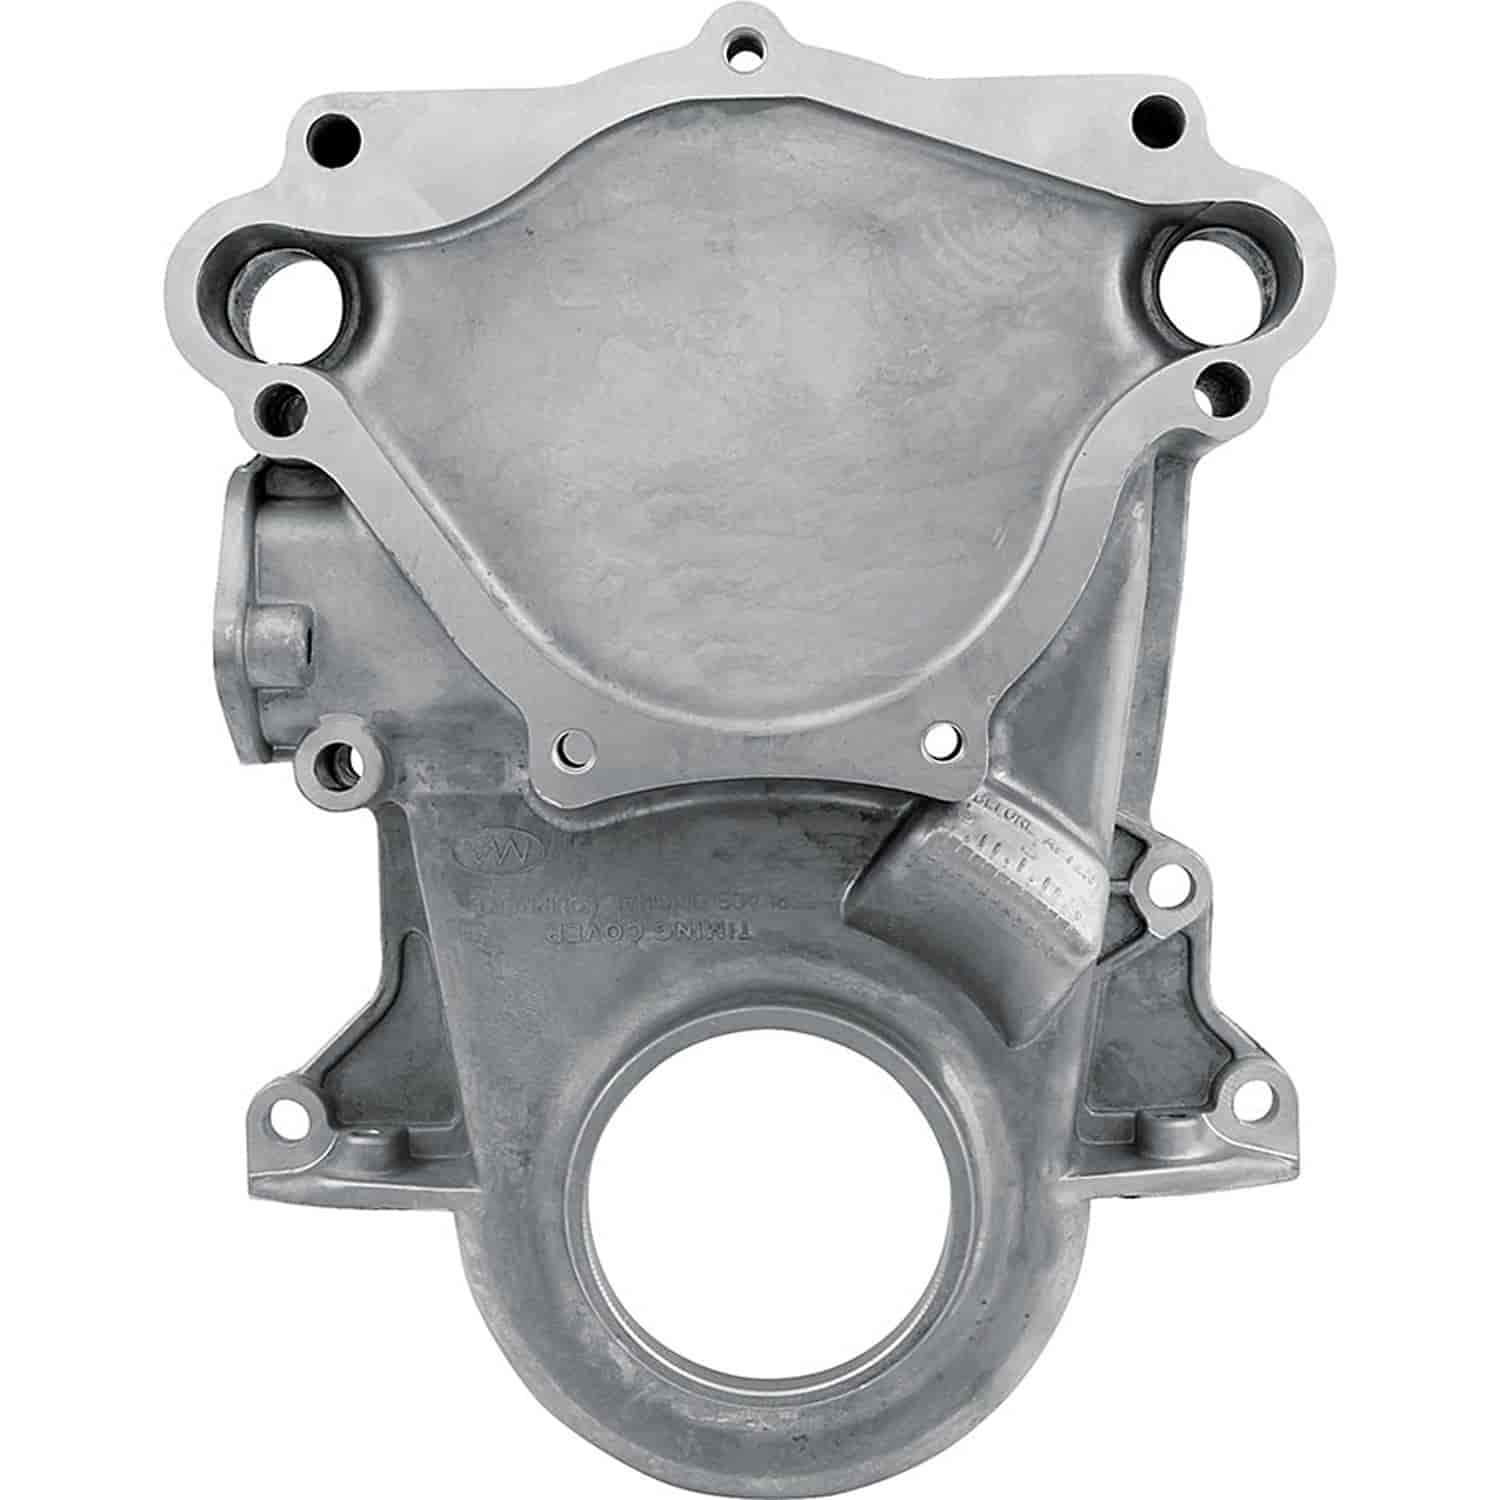 Allstar Performance aluminum timing cover fits most SB Mopar inLAin series blocks with driver s side